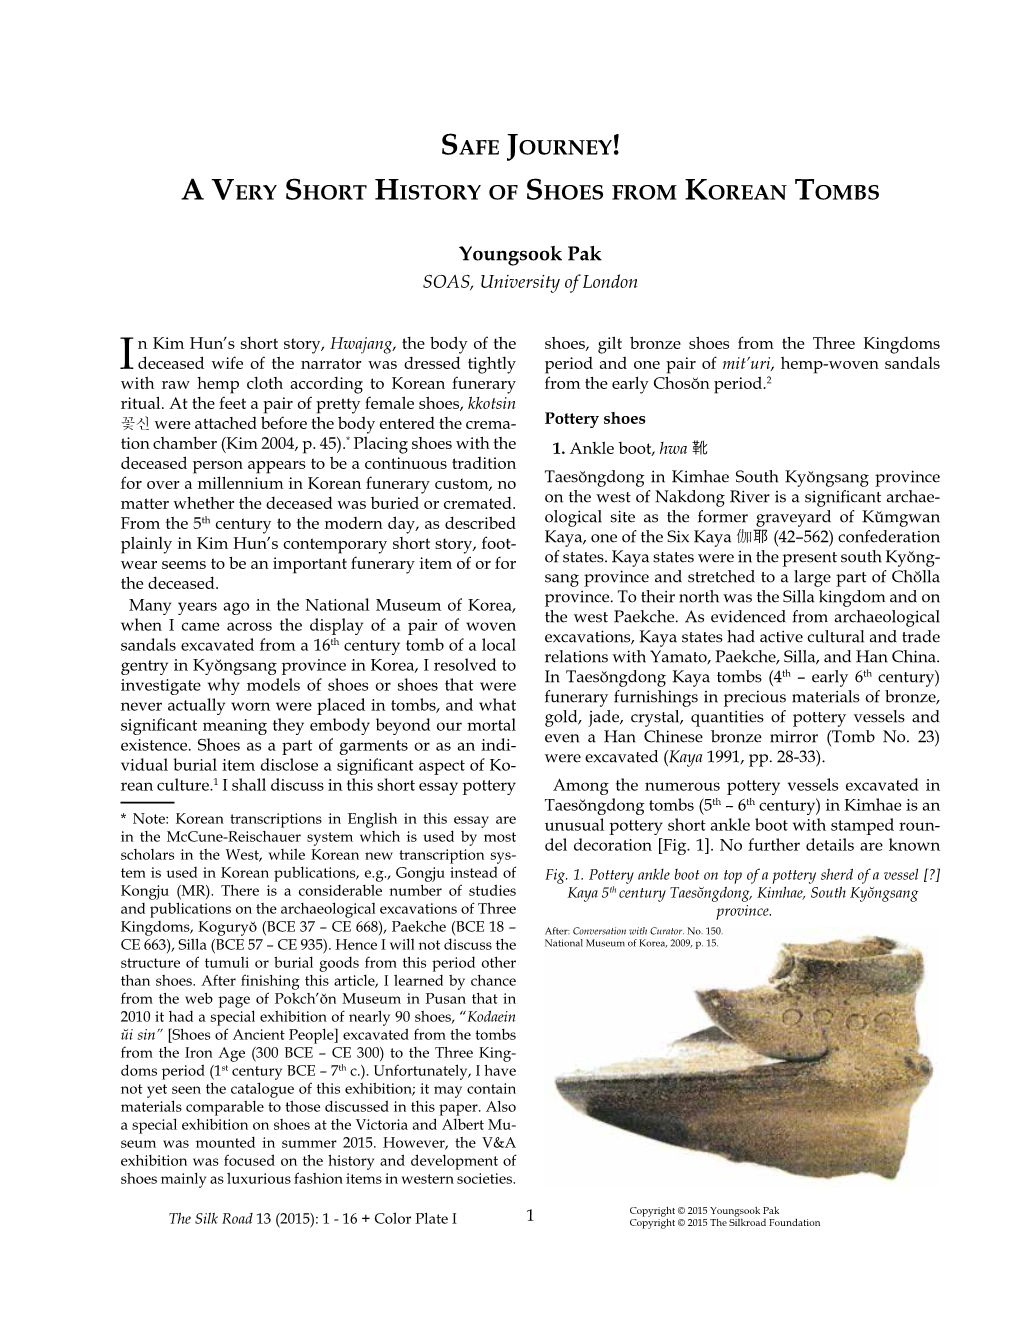 A Very Short History of Shoes from Korean Tombs